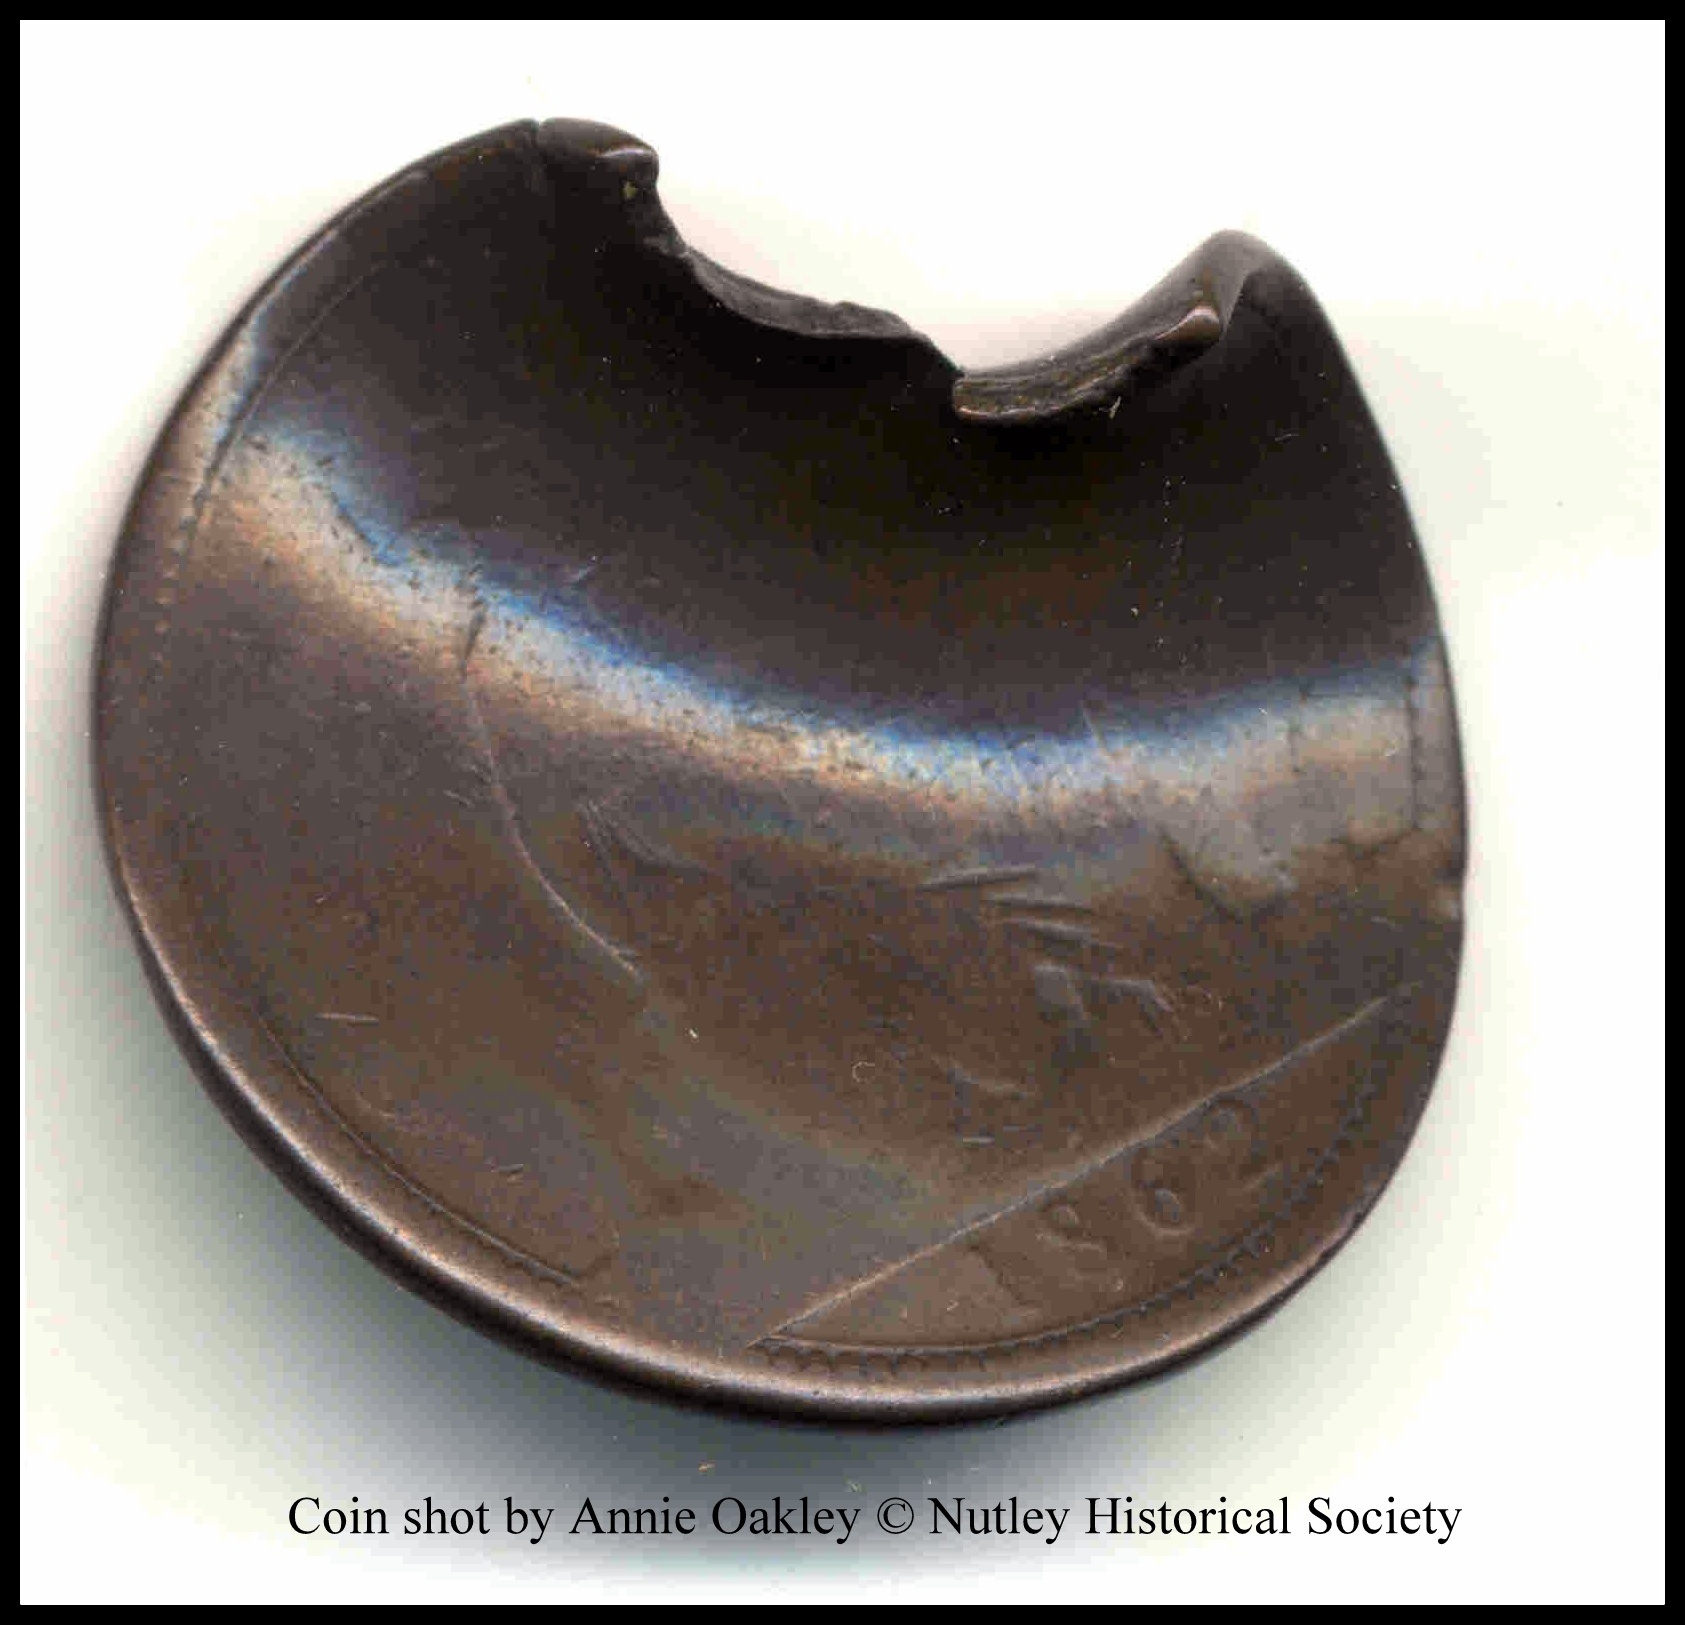 Nutley NJ Museum Exhibit: Coin shot in mid-air by Annie Oakley